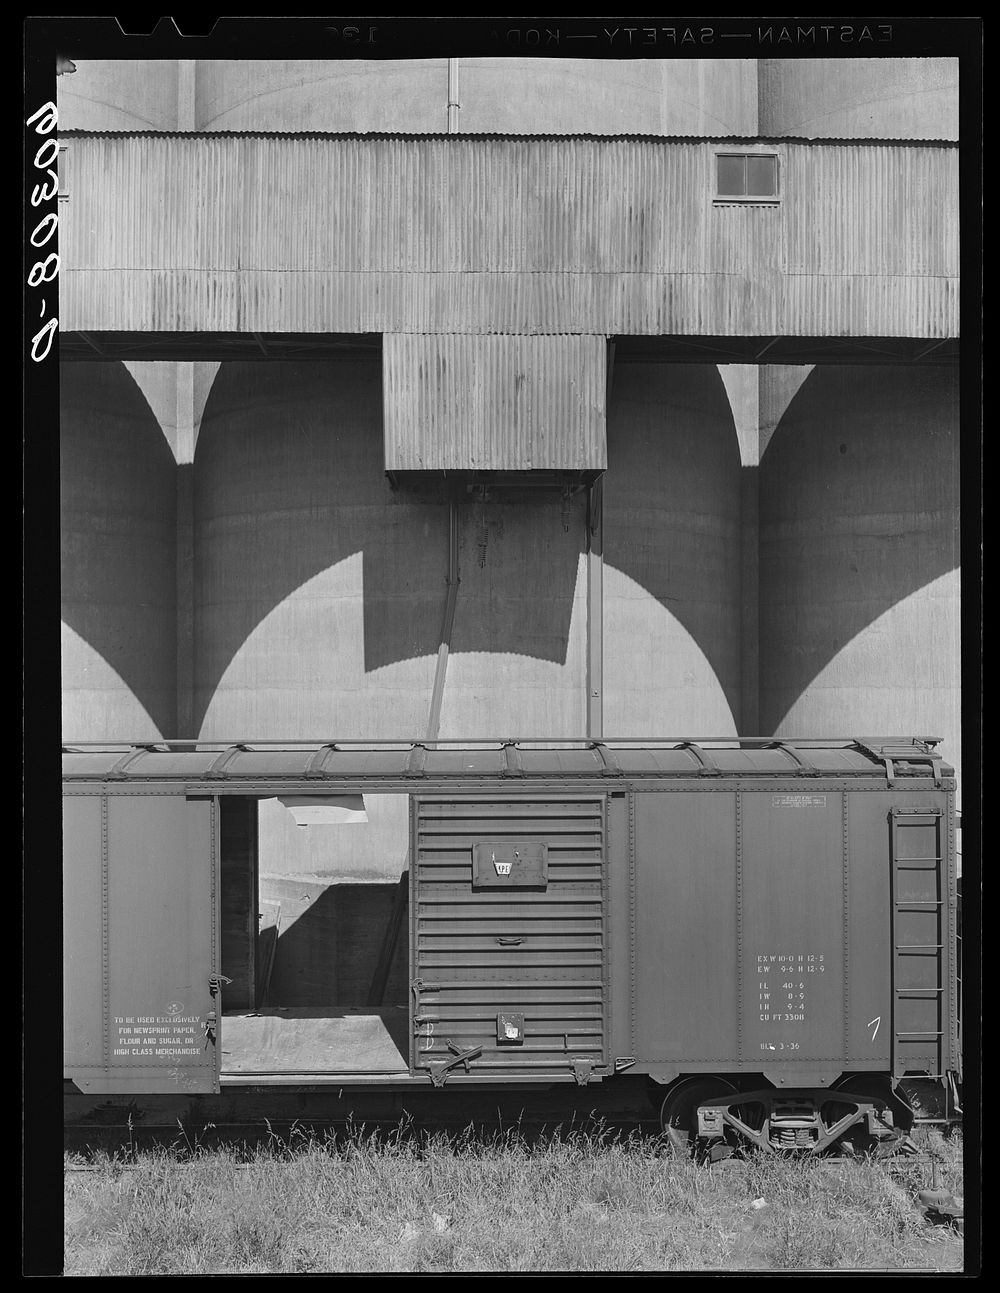 Grain elevators and freight car. Minneapolis, Minnesota. Sourced from the Library of Congress.